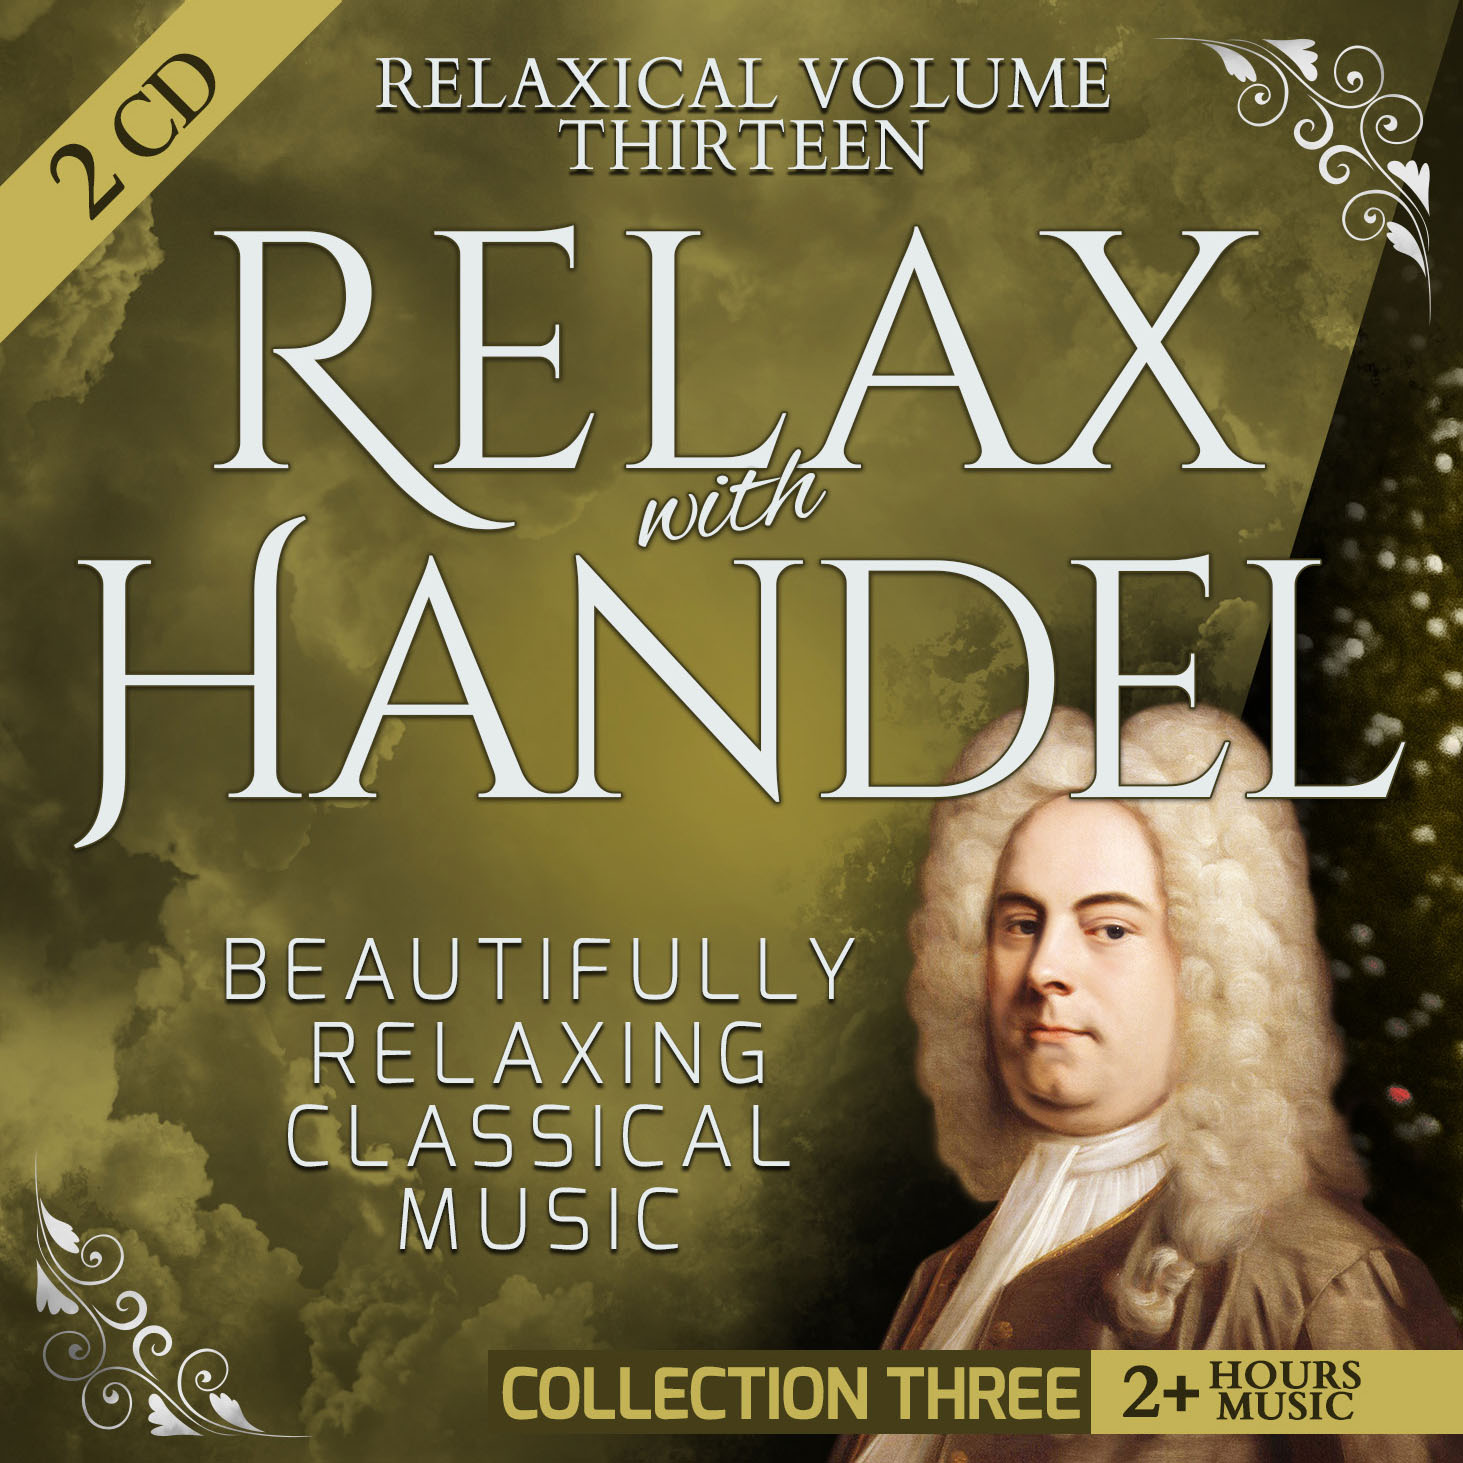 Volume 13 - Relax with Handel (Collection Three): Beautifully Relaxing Classical Music